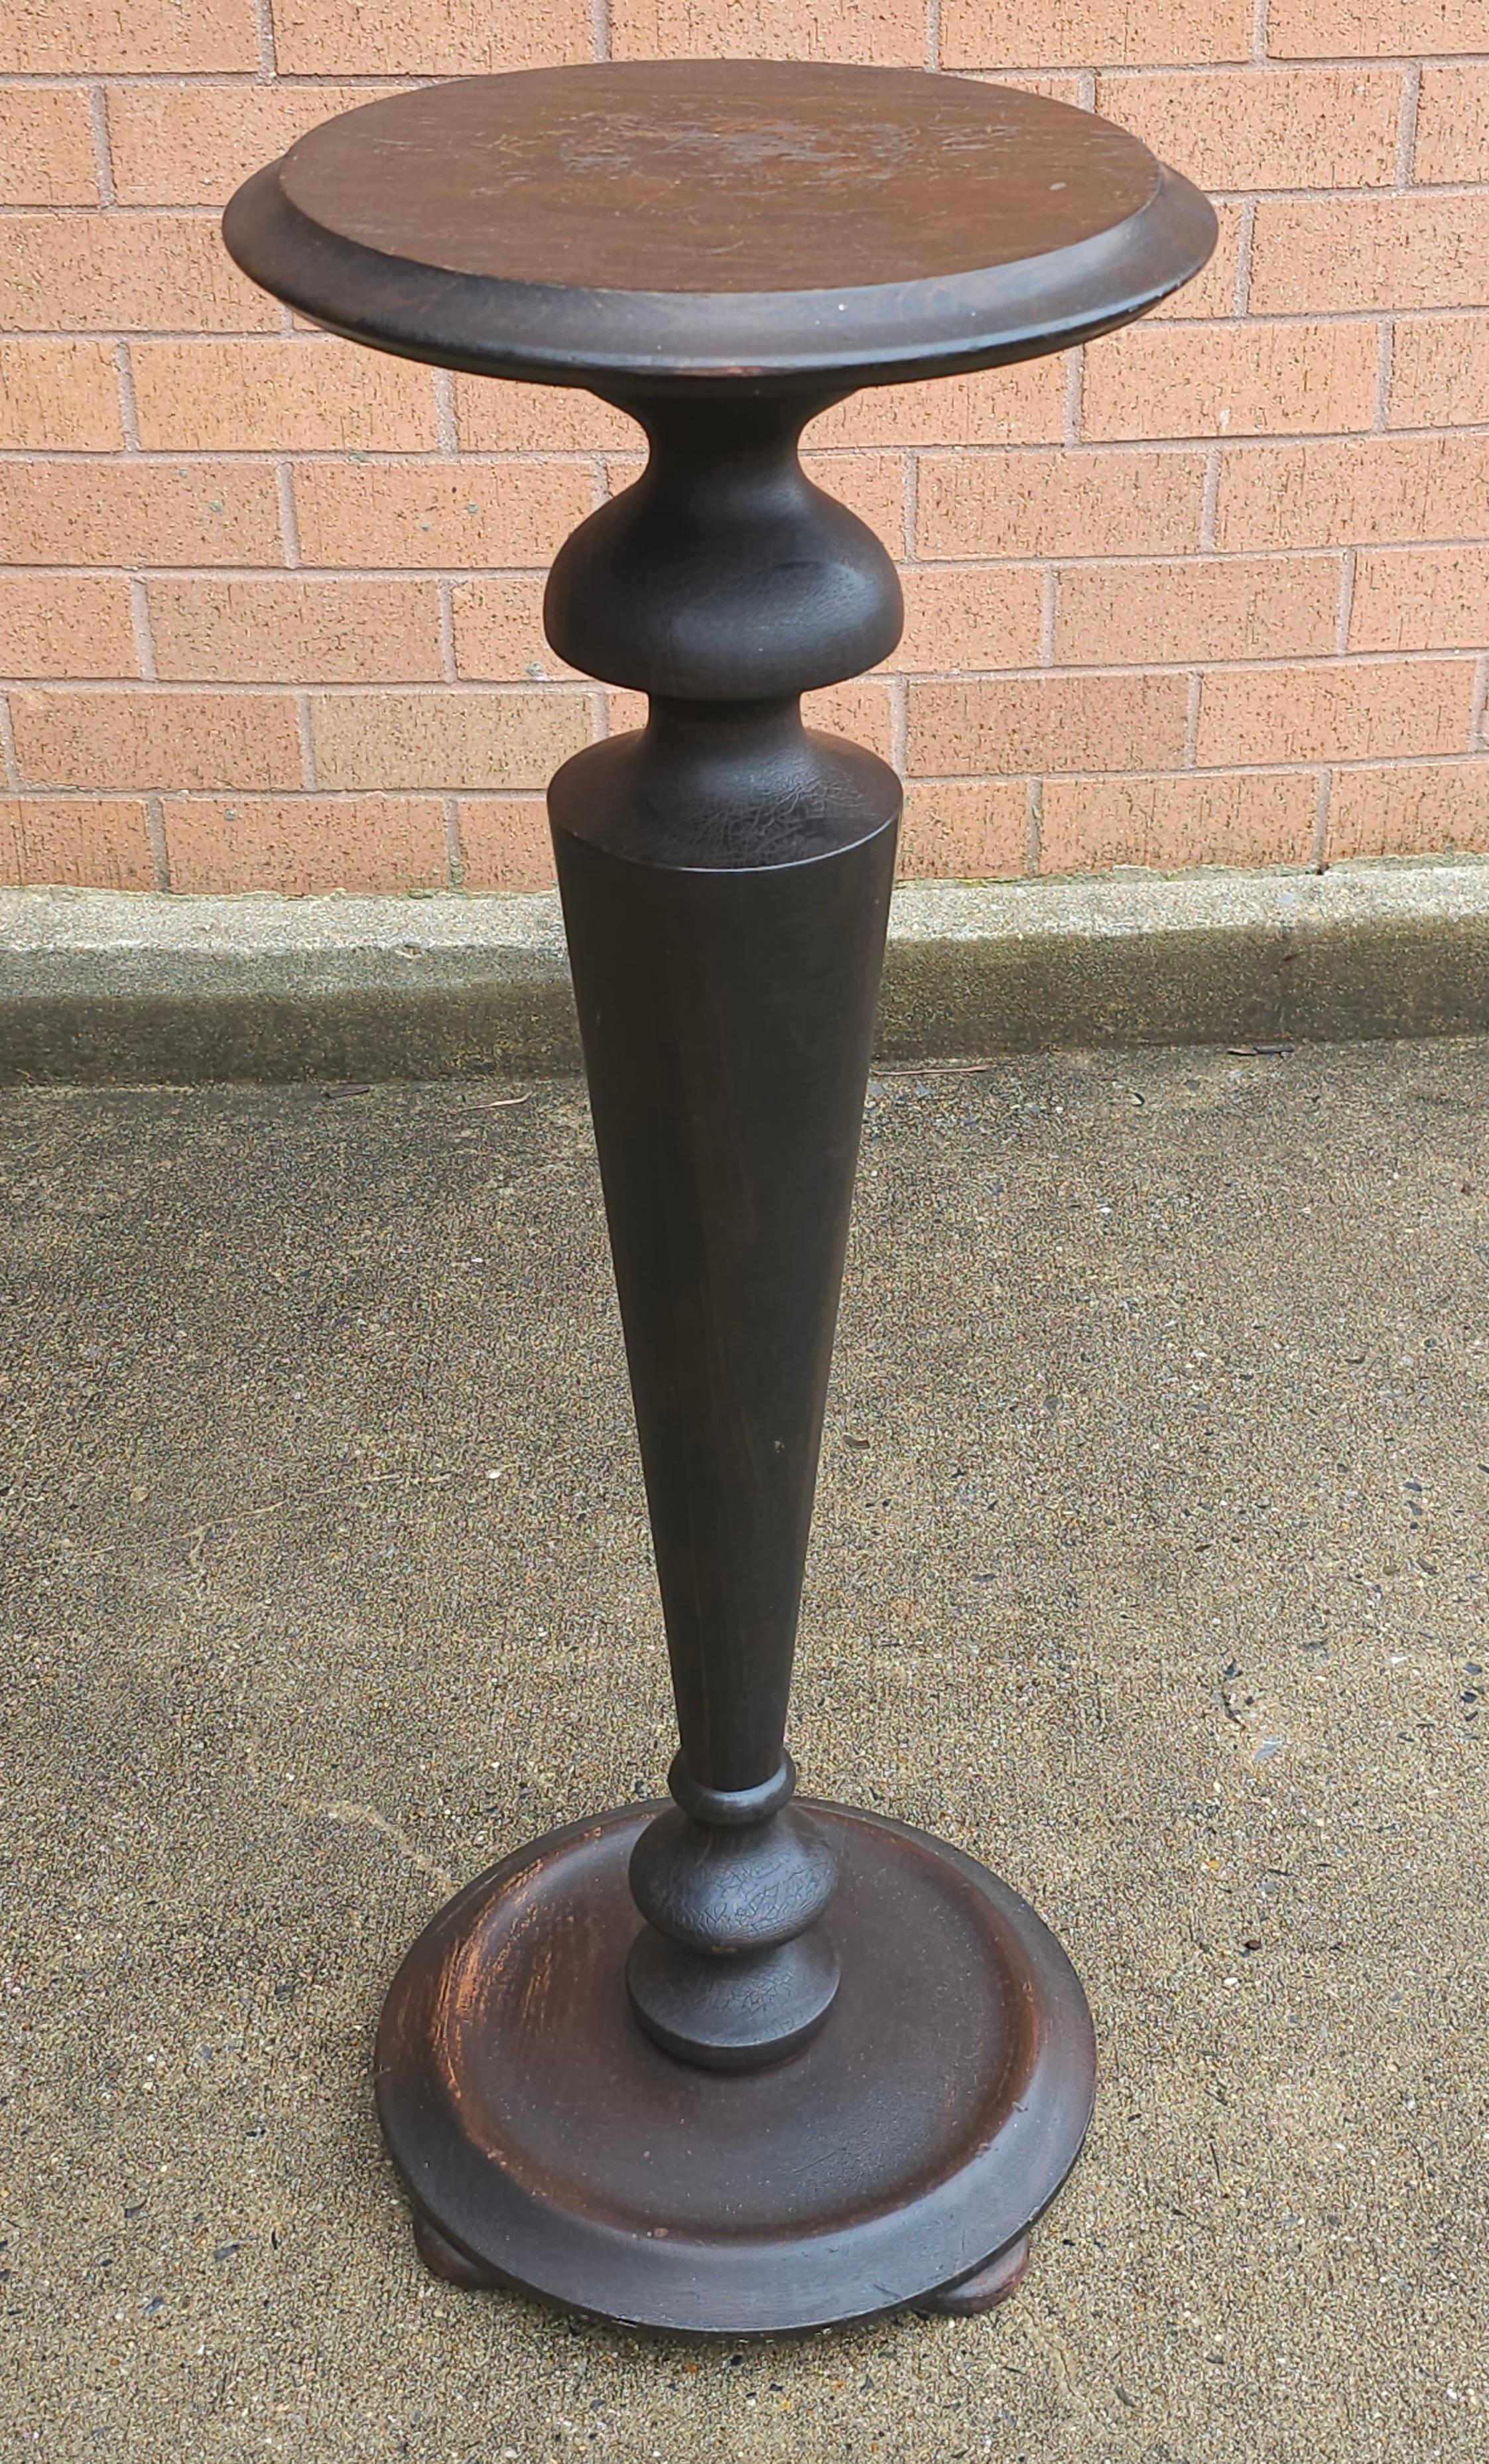 A Late 19th Century Neoclassical Stained Mahogany Pedestal. Measures 13